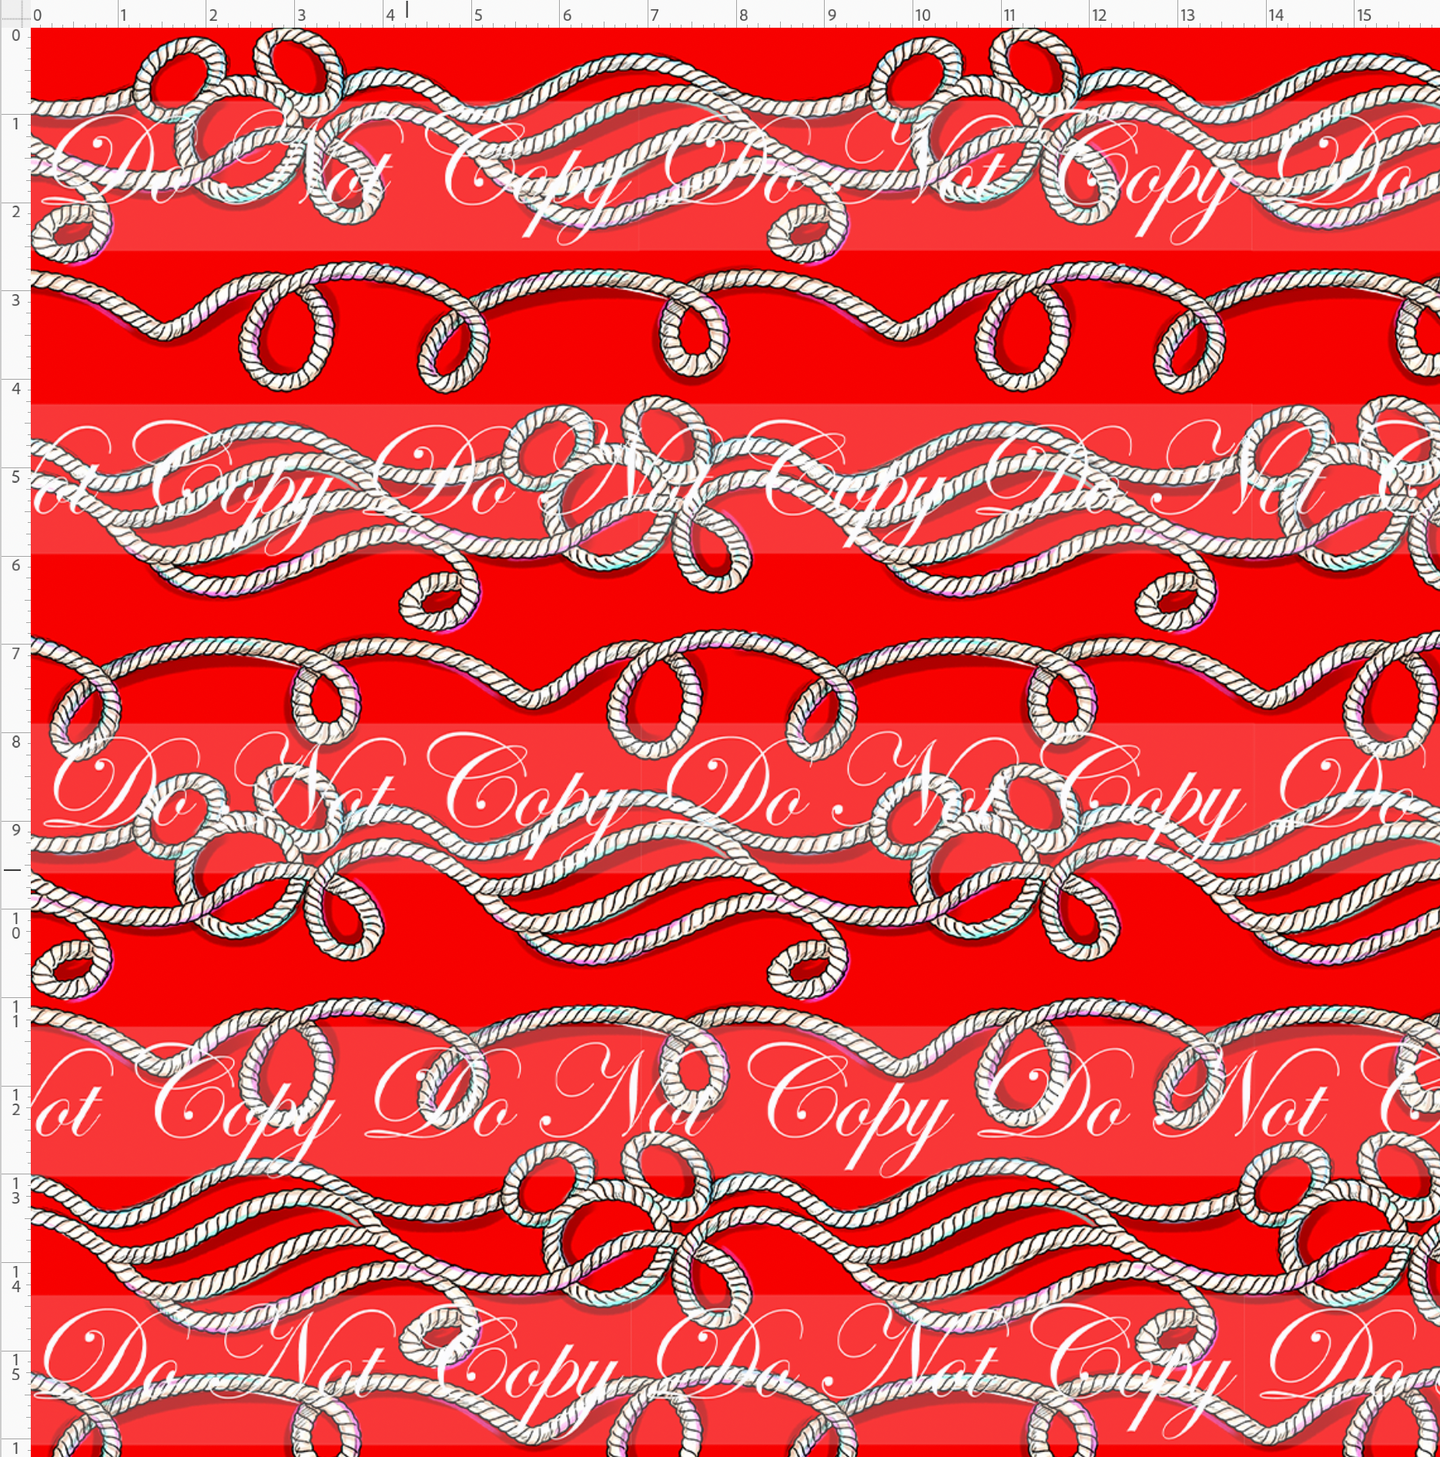 Retail - Set Sail - Ropes - Red - LARGE SCALE